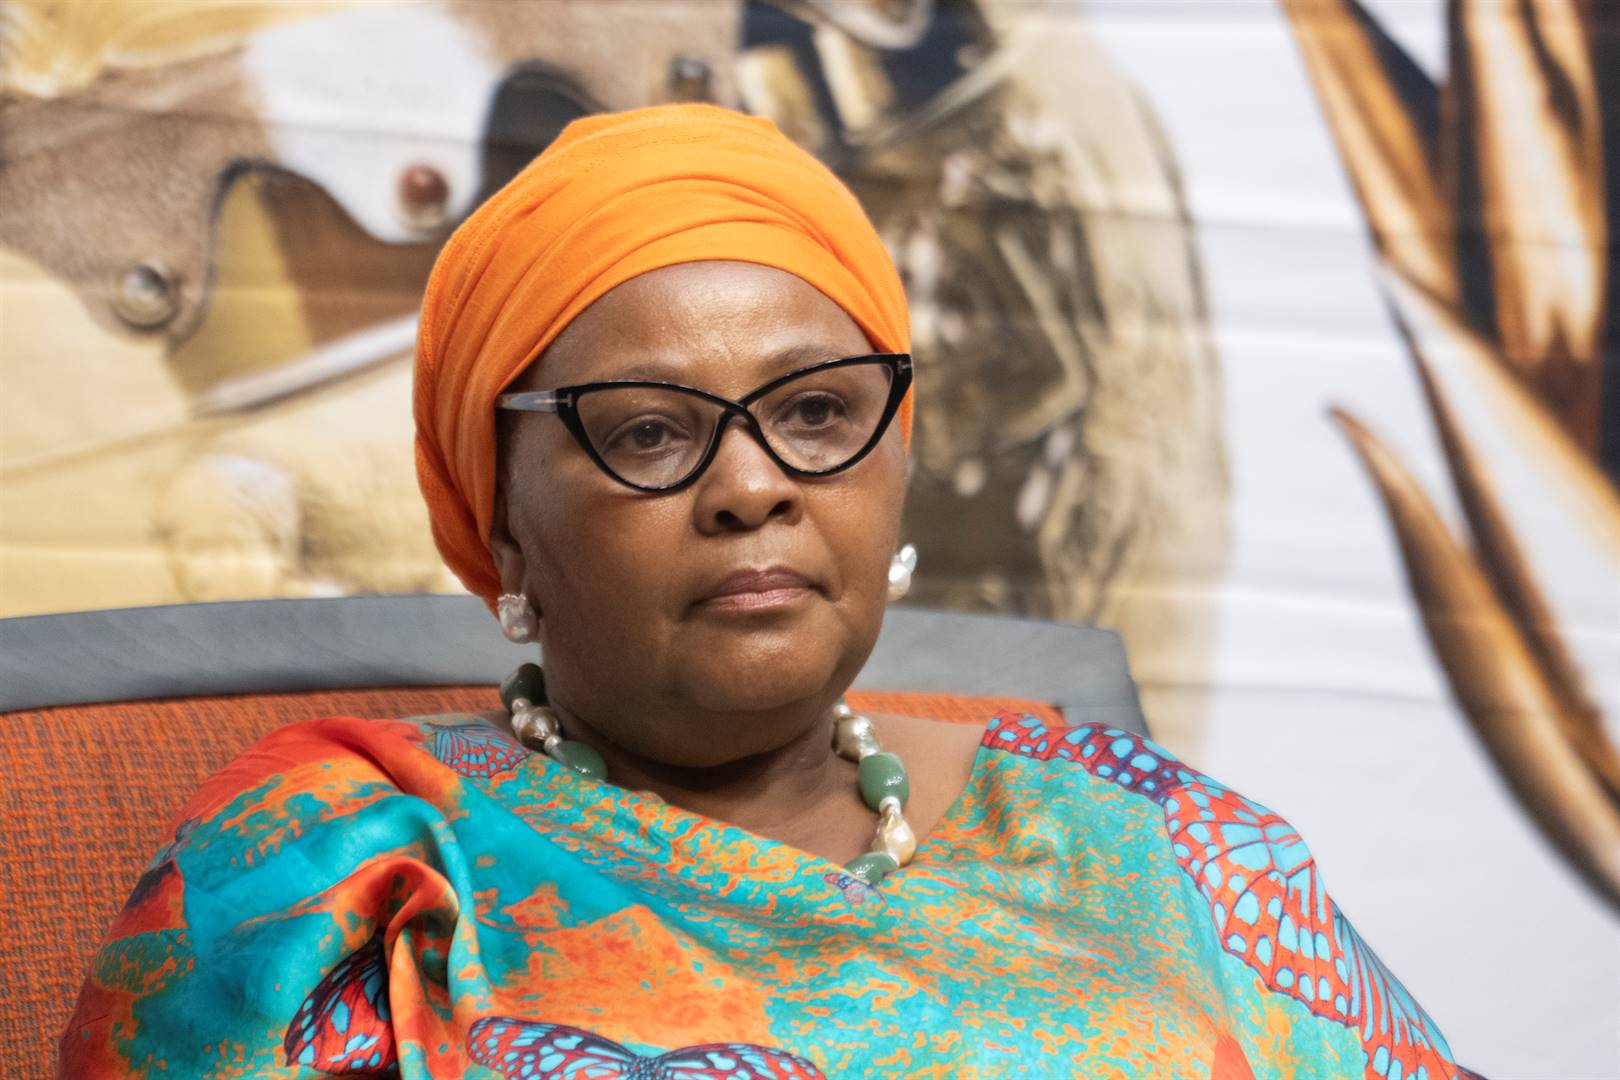 National Assembly Speaker Nosiviwe Mapisa-Nqakula recently expressed shock at Chief Justice Raymond Zondo's comments about the lack of accountability in Parliament.